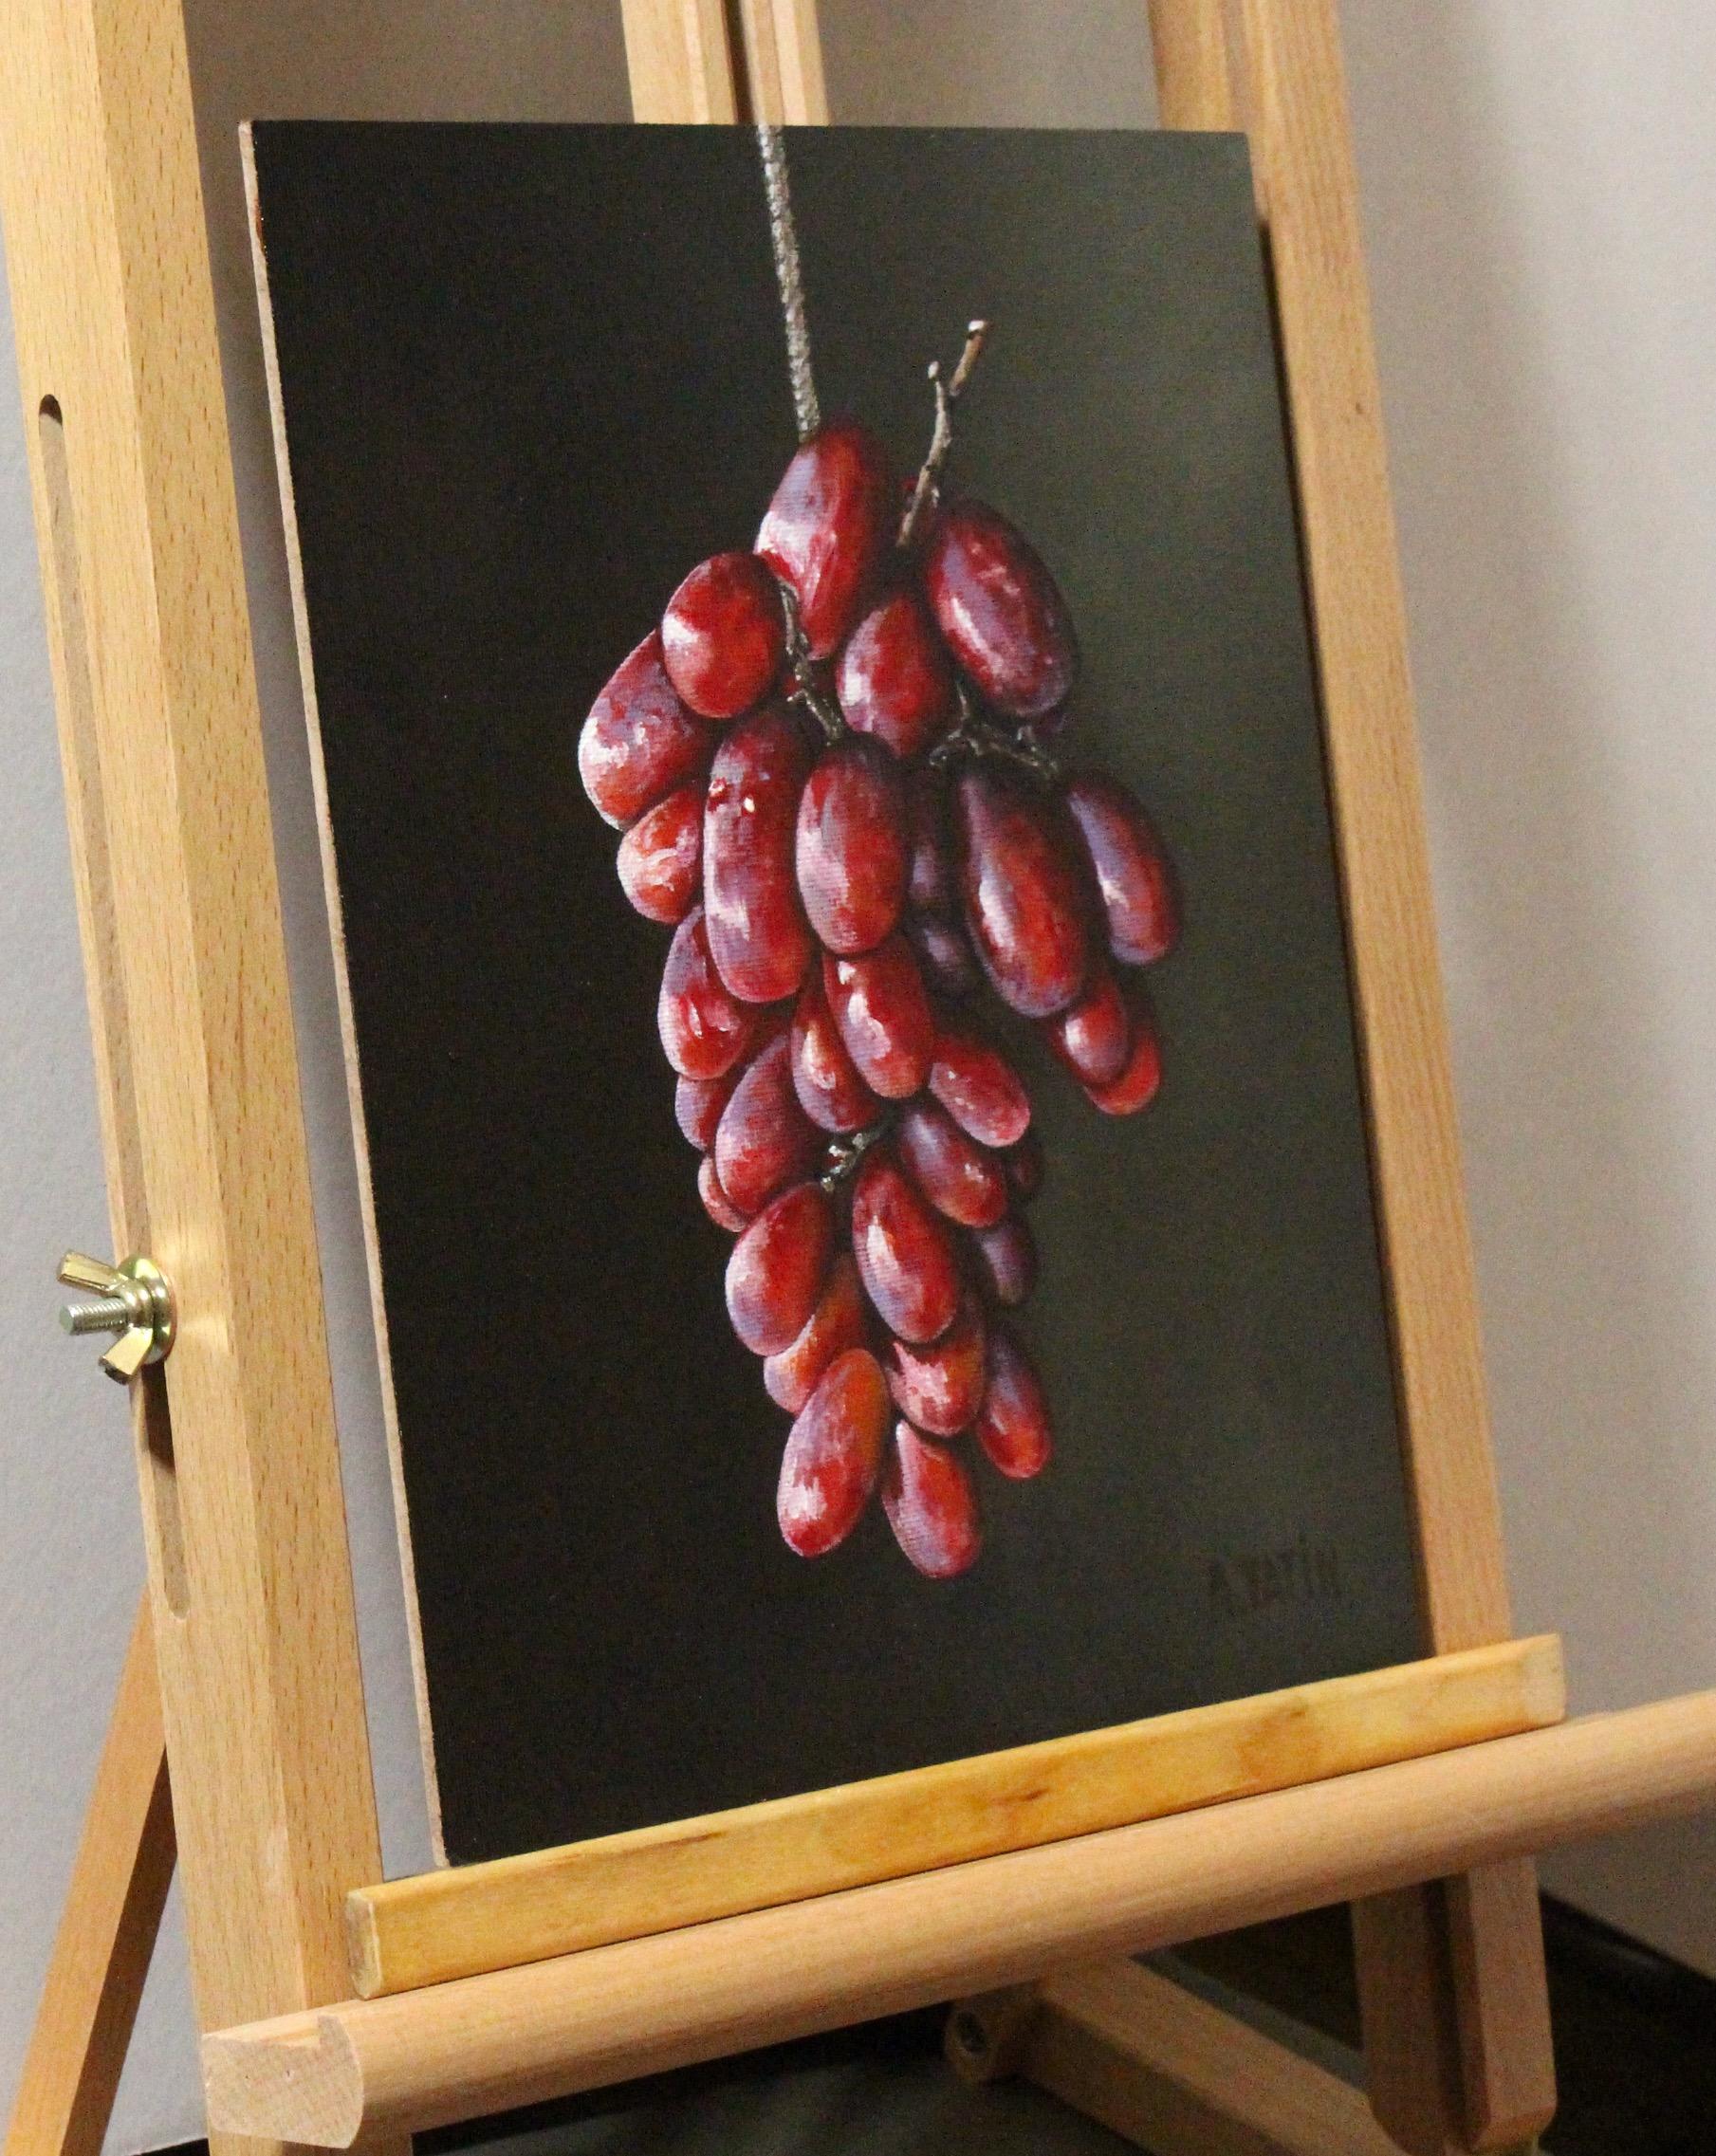 Red Grapes on a String, Oil Painting - Contemporary Art by Art Tatin